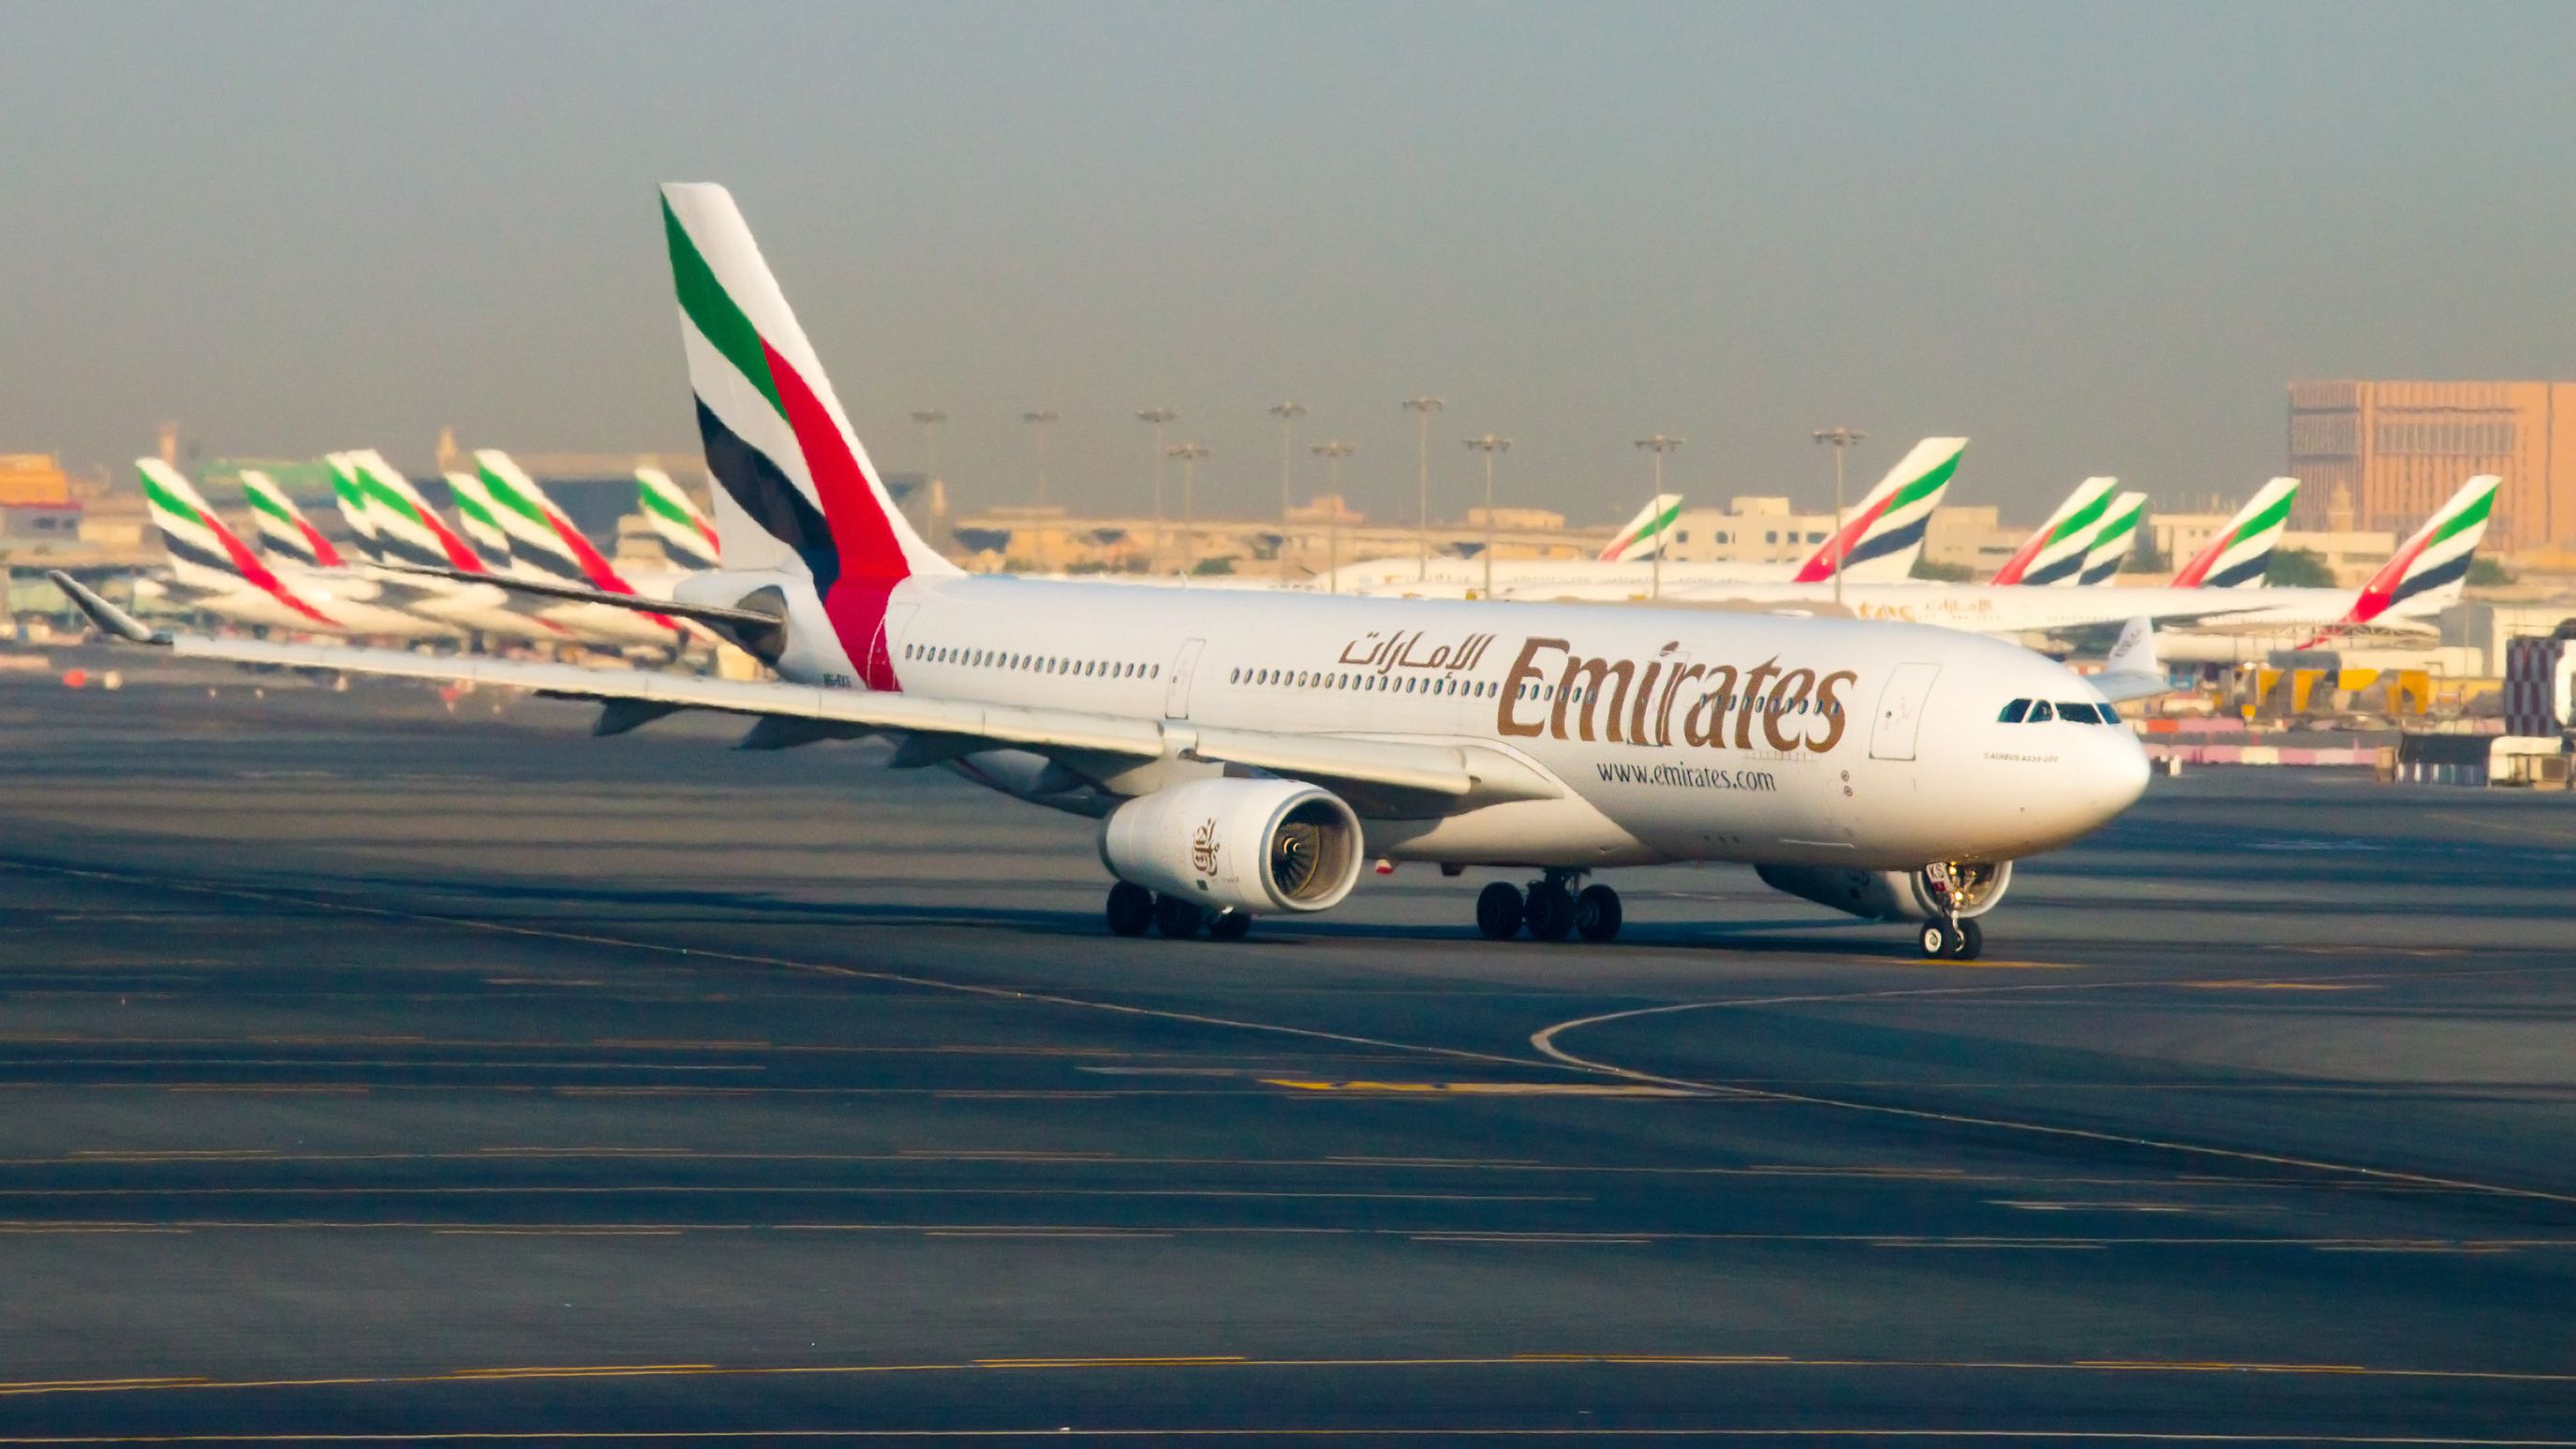 An Emirates Boeing 777 on the Dubai International Airport apron, in front of several parked Emirates aircraft.